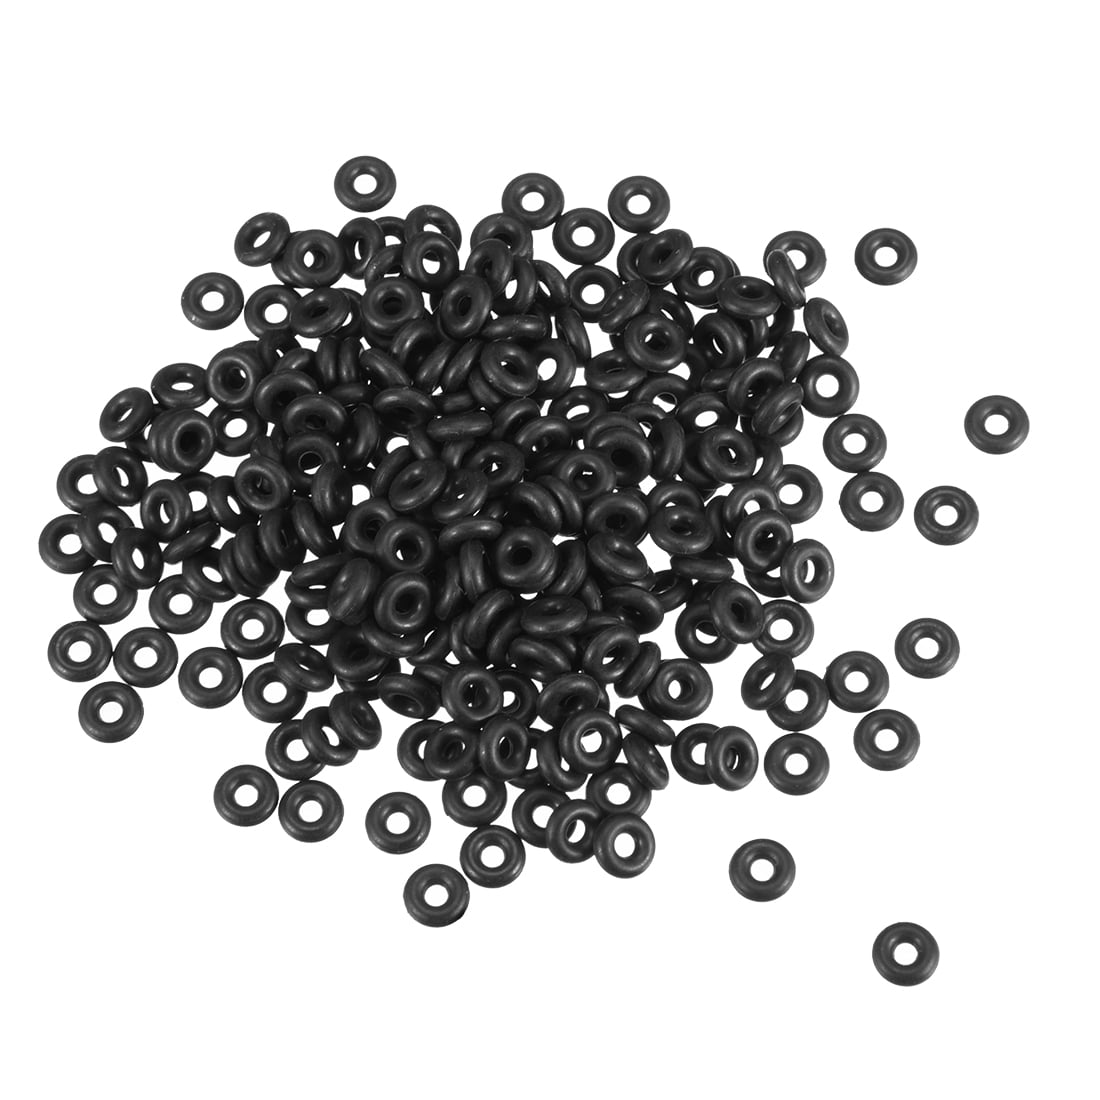 5mm Section 120mm Bore NITRILE 70 Rubber O-Rings 